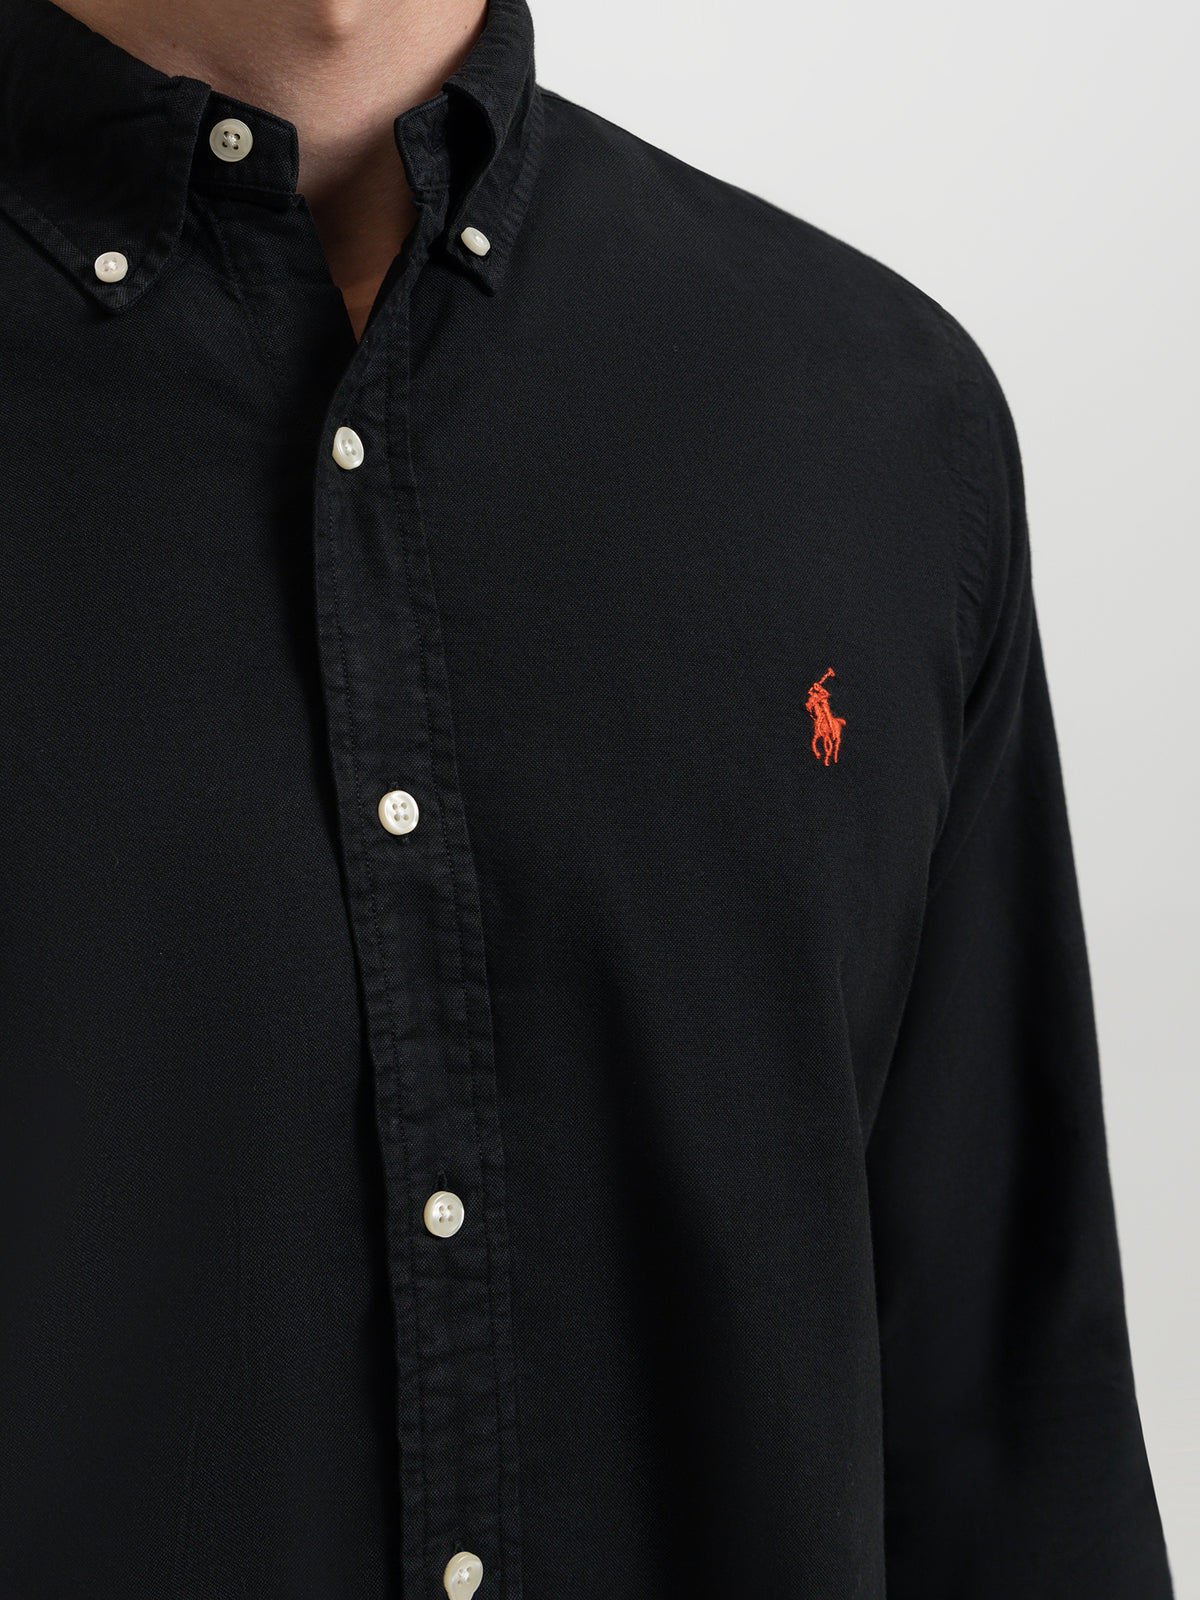 Long Sleeve Embroidered Shirt in Black